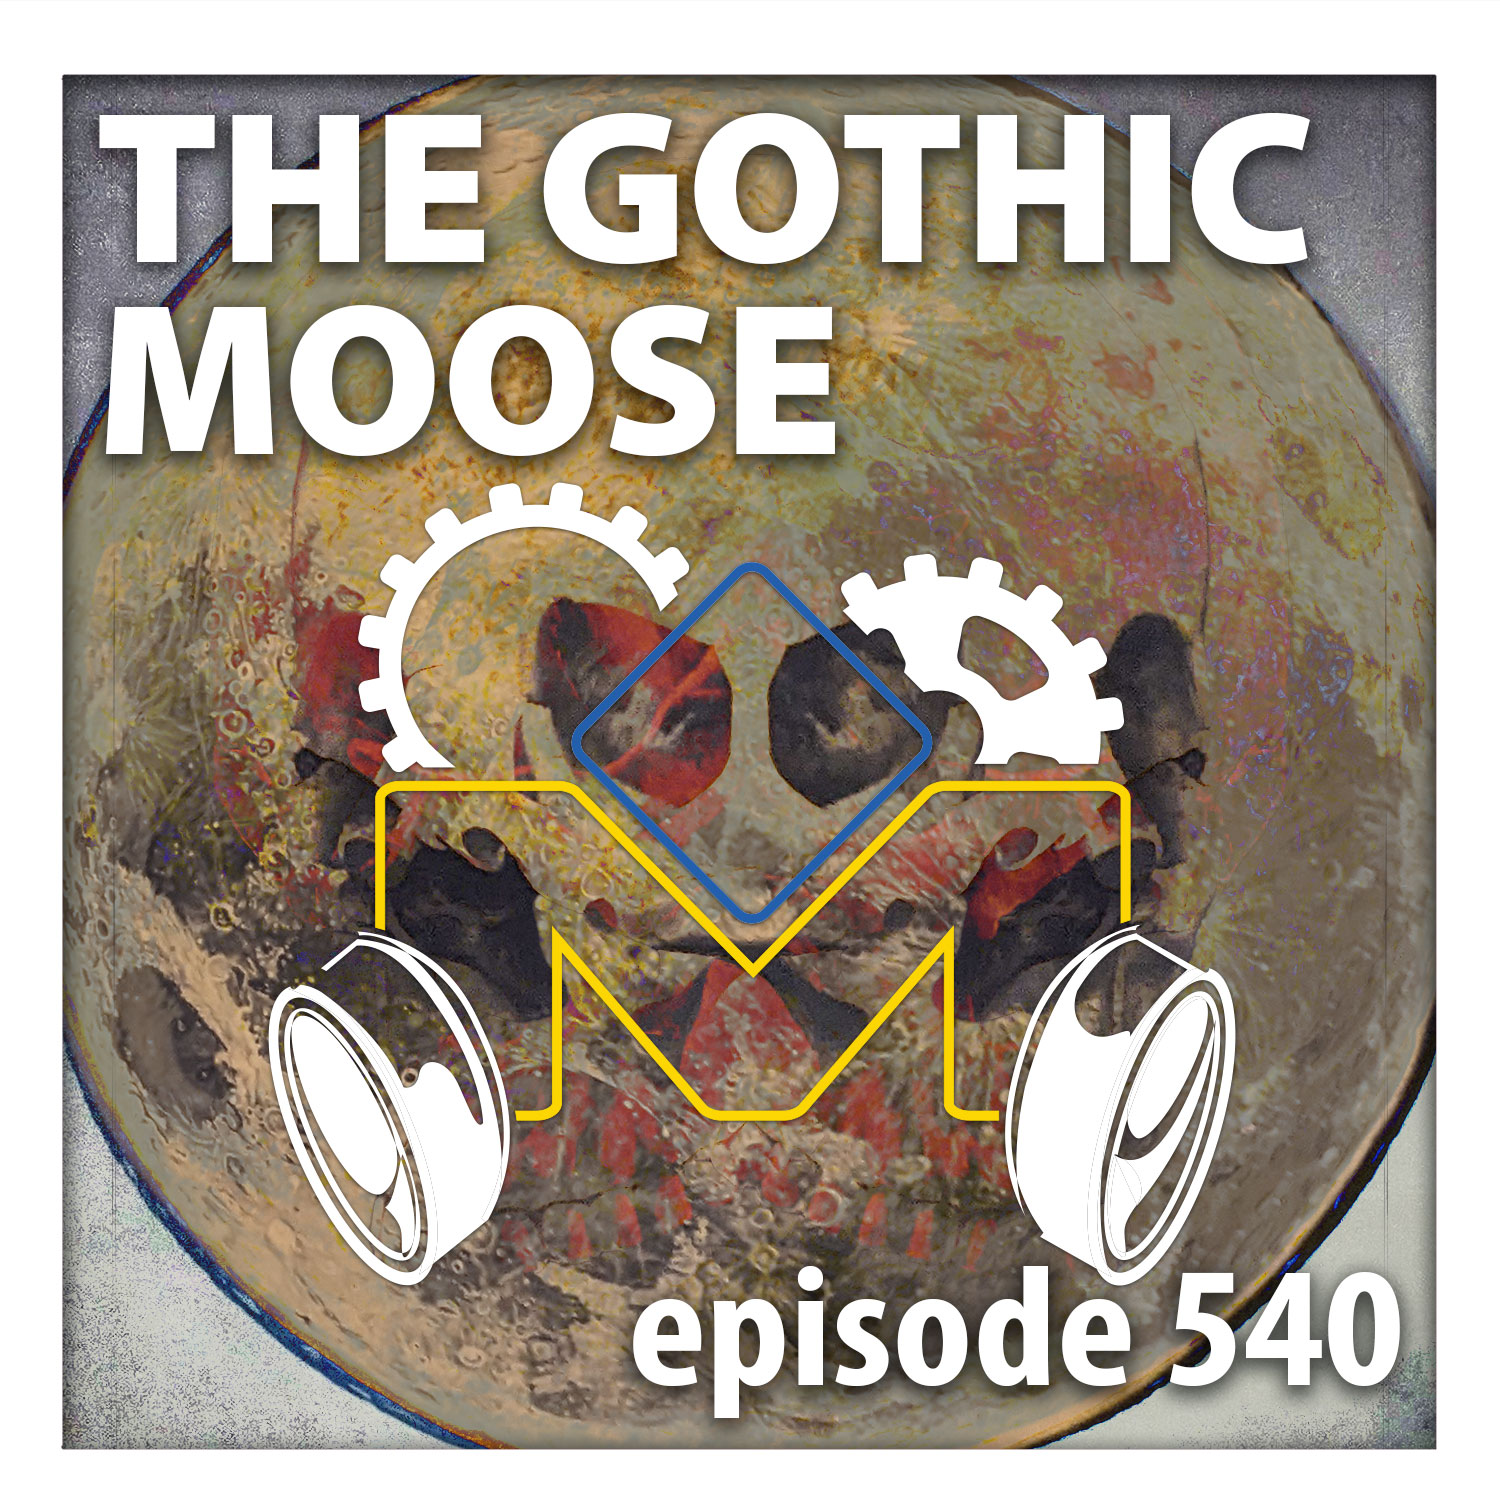 The Gothic Moose – Episode 540 – All Ukrainian bands or bands supporting Ukraine